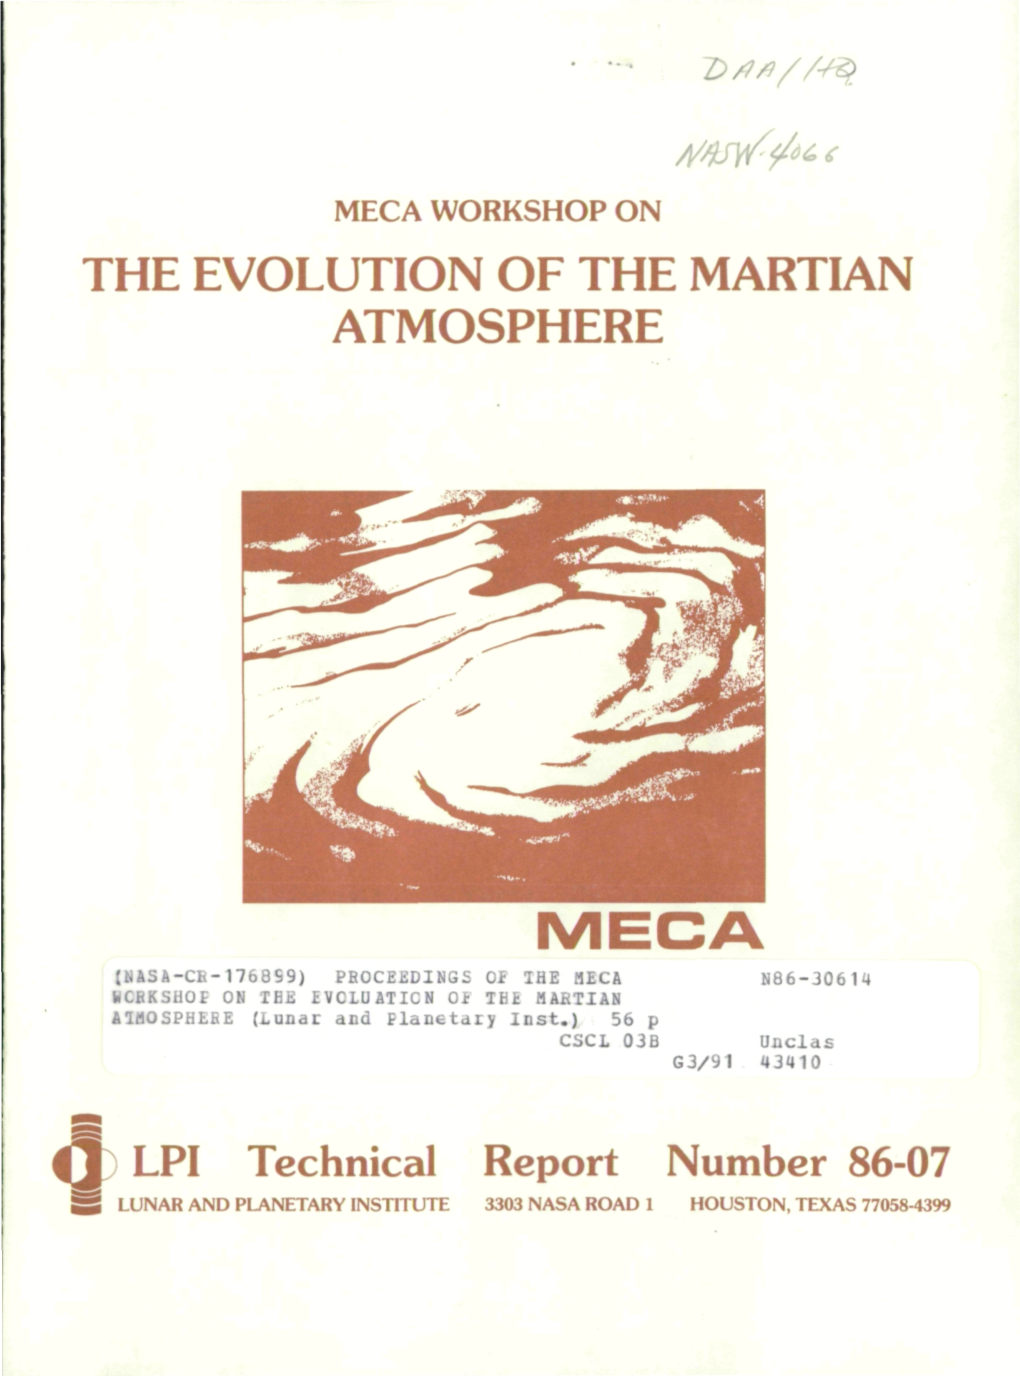 The Evolution of the Martian Atmosphere